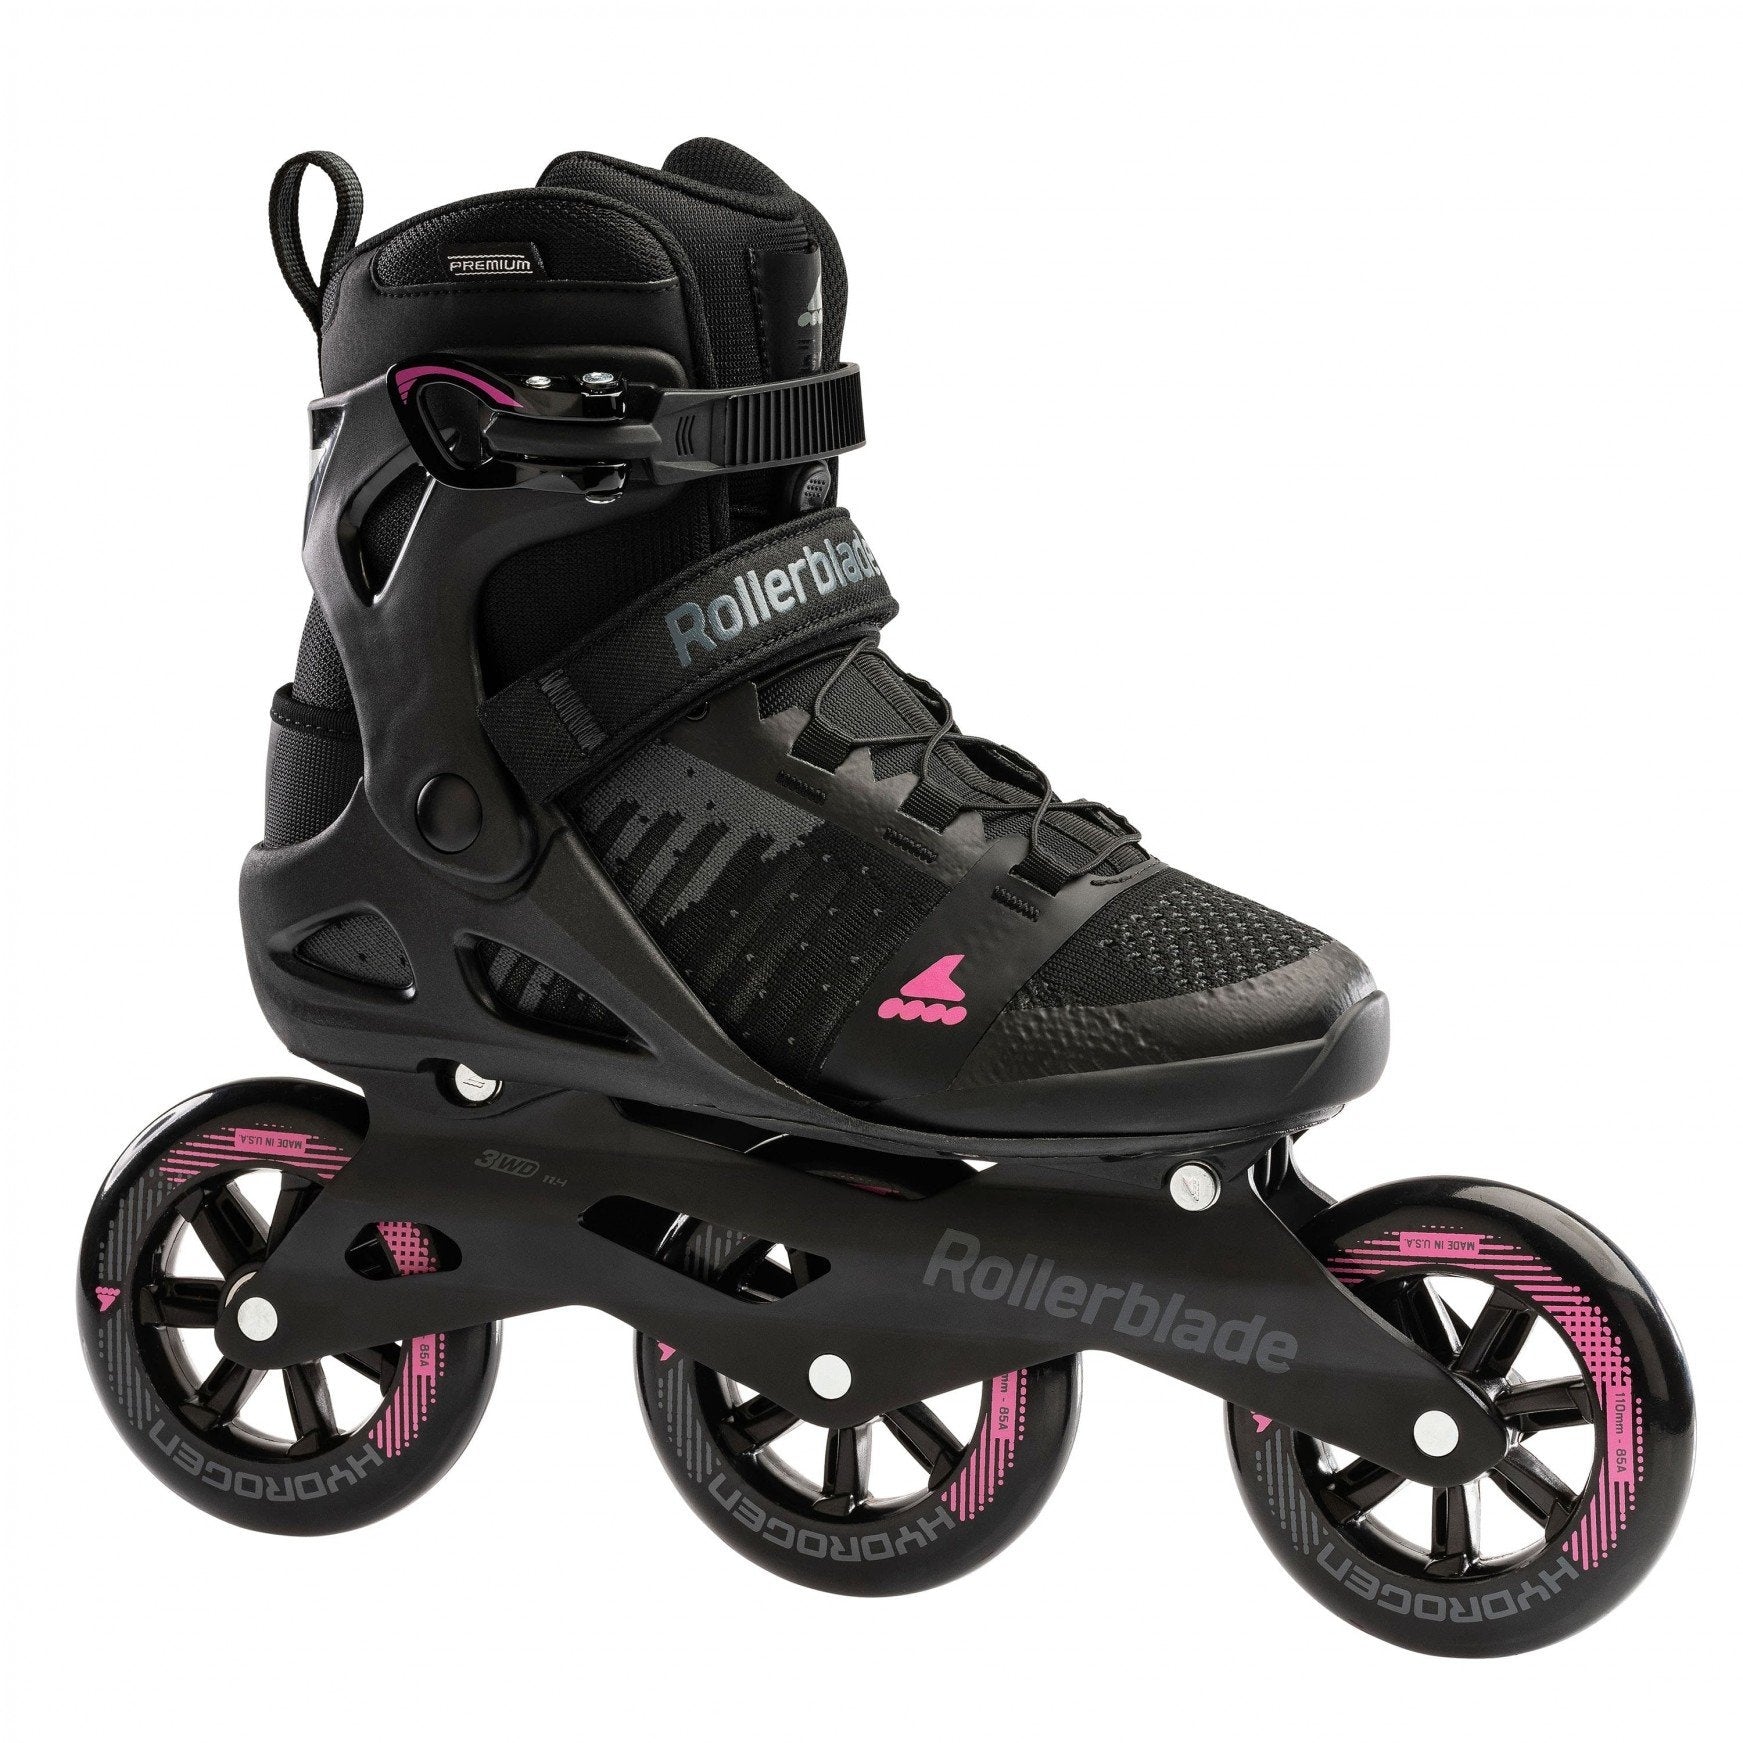 Macroblade 110 3WD Women - Black Orchid